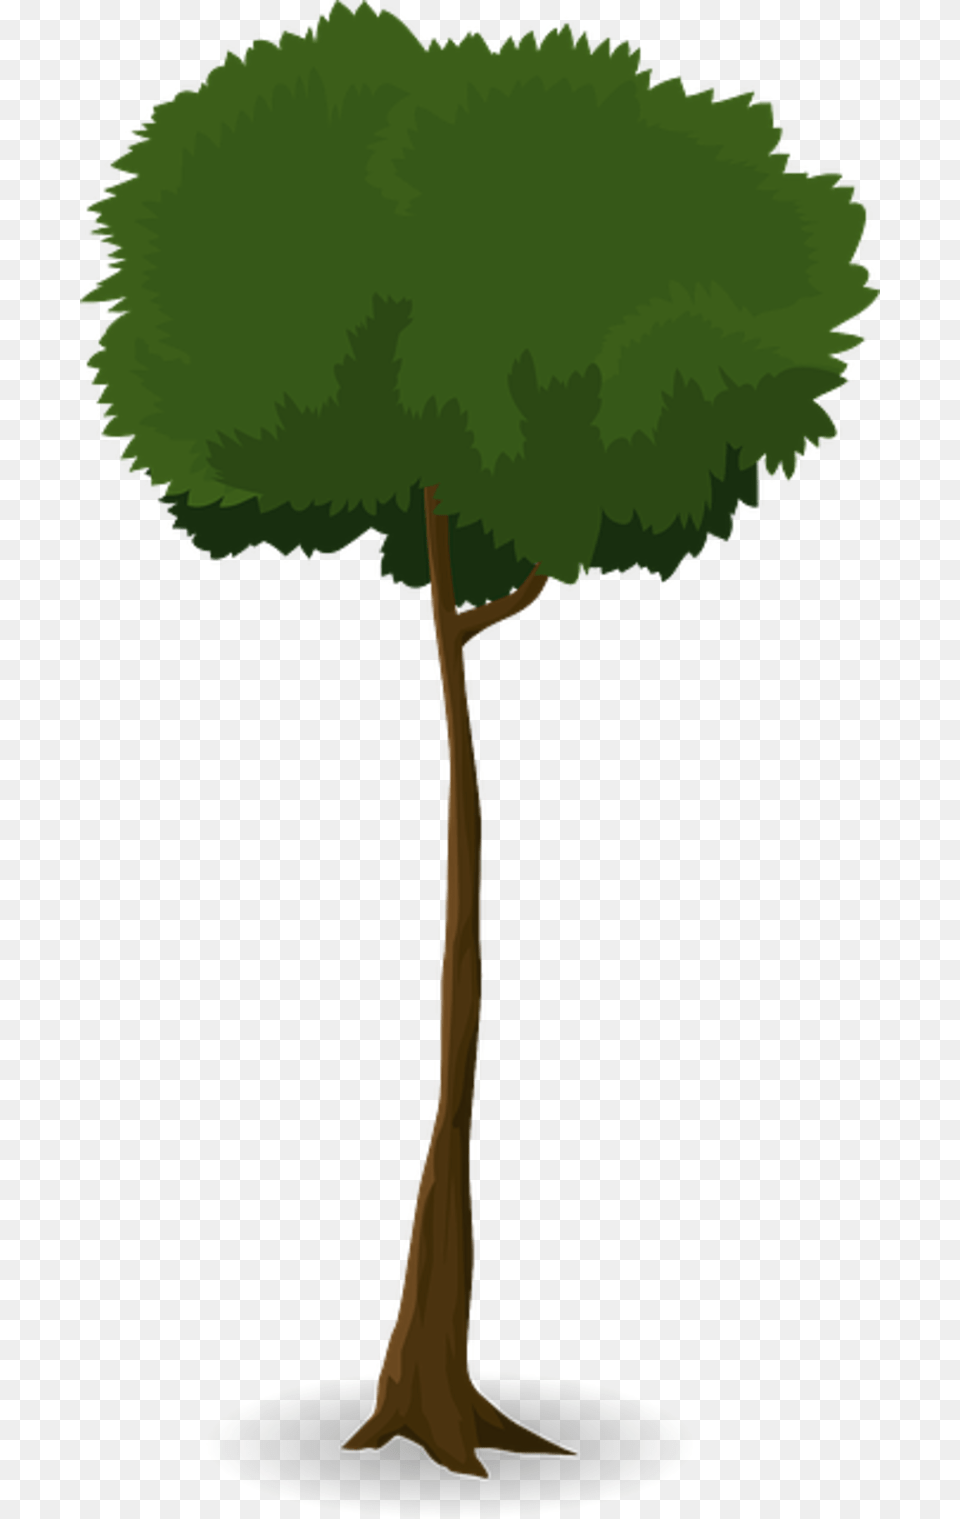 Tree Trunk Nature Leaves Branches Graphic Organic Trunk, Plant, Tree Trunk, Sycamore, Vegetation Free Transparent Png